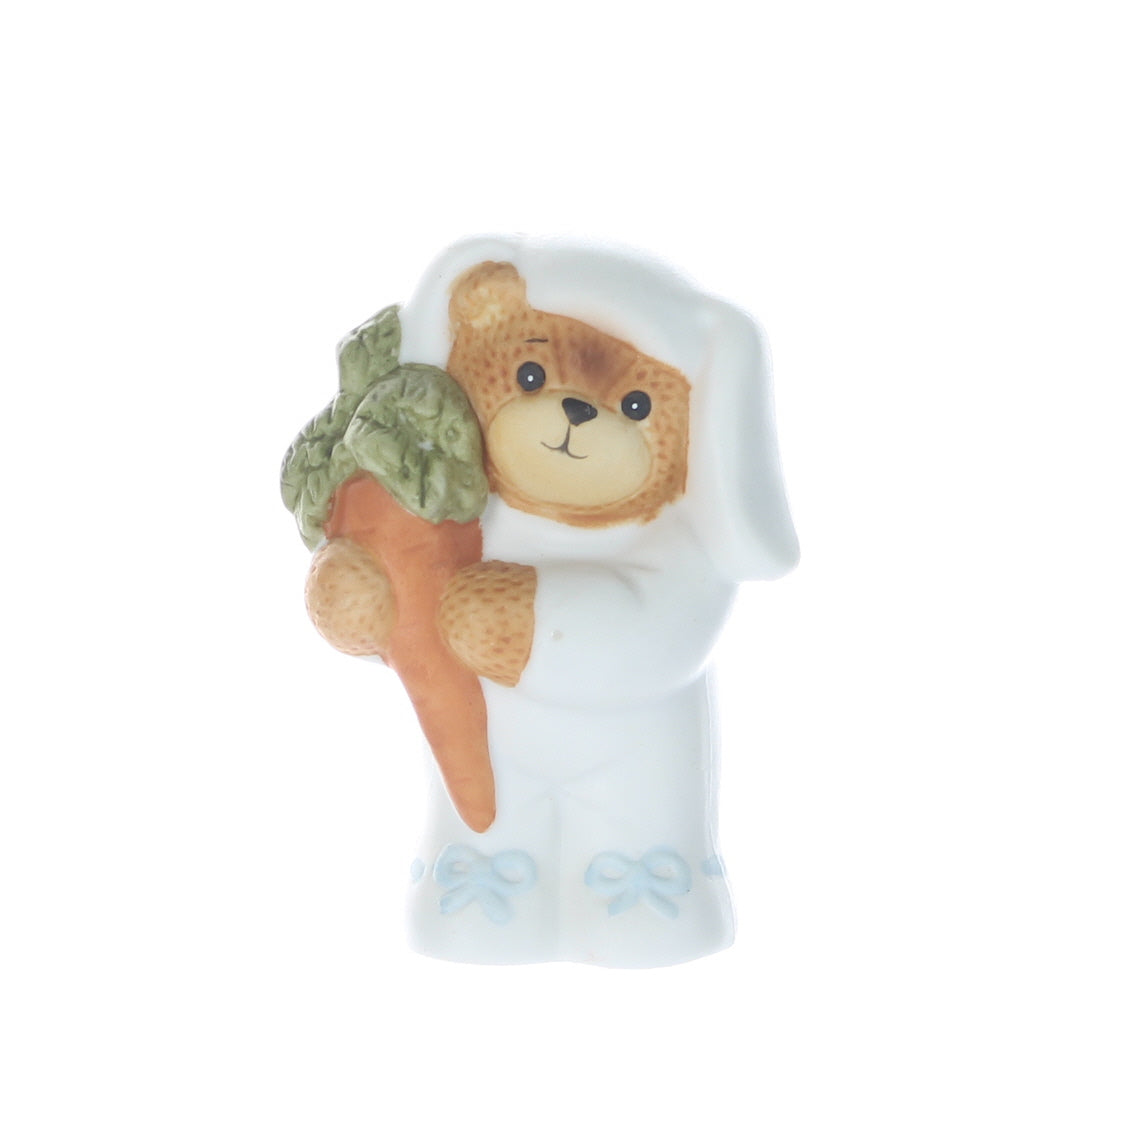 Lucy-and-Me-Porcelain-Figurine-Easter-Bunny-with-Carrot